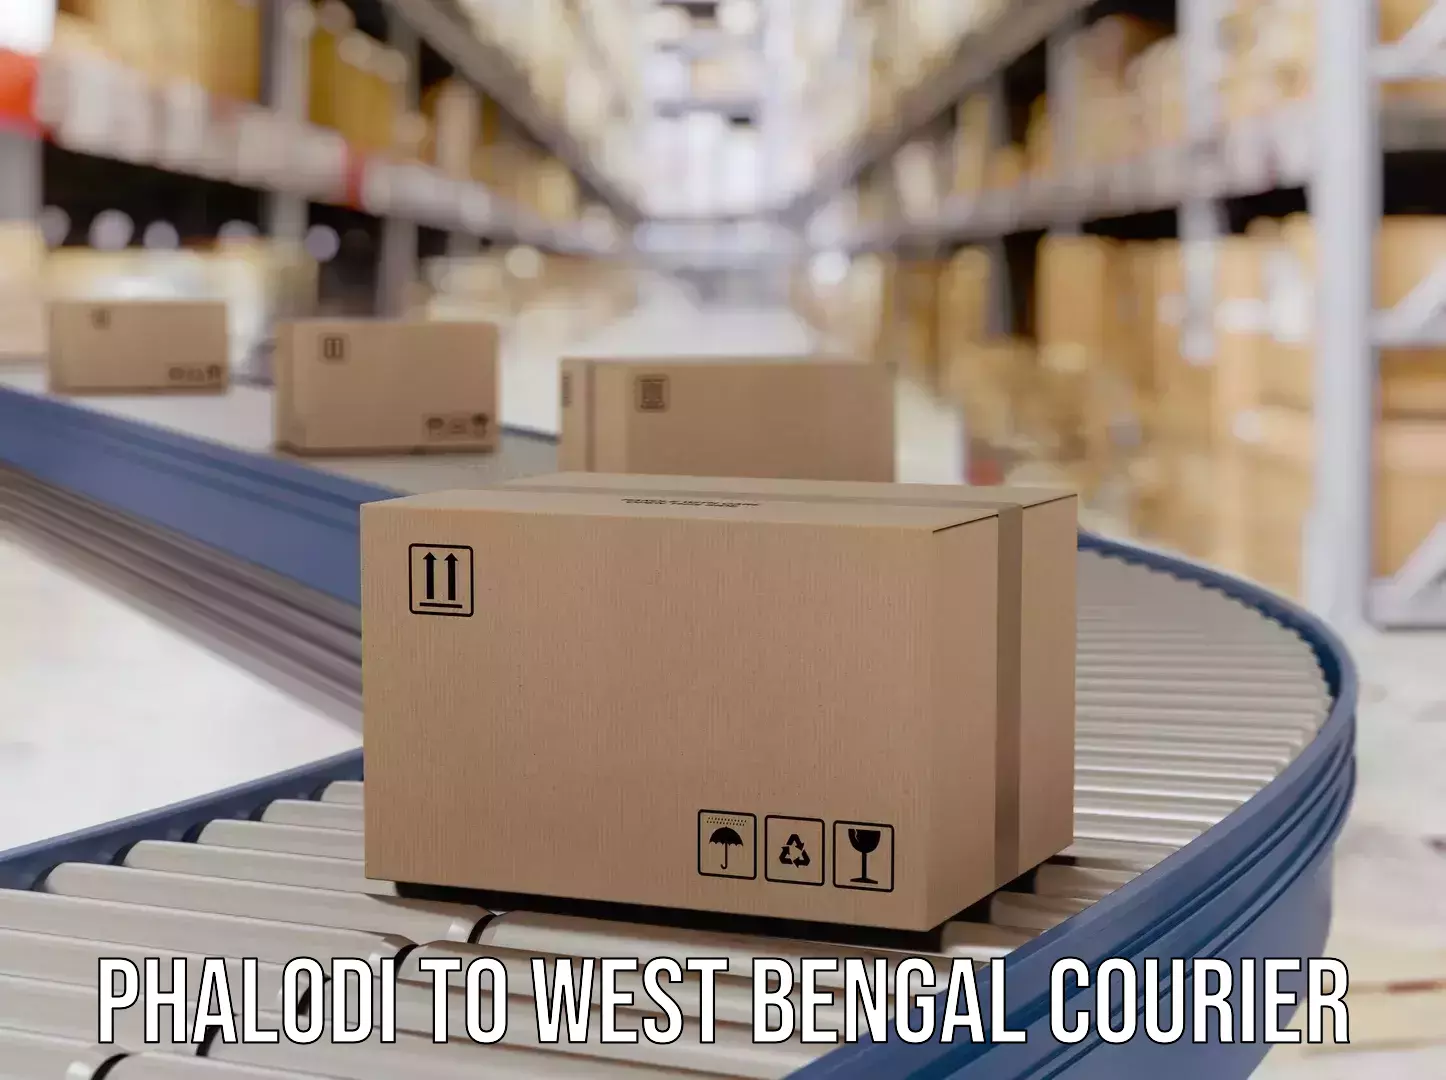 Speedy delivery service in Phalodi to West Bengal